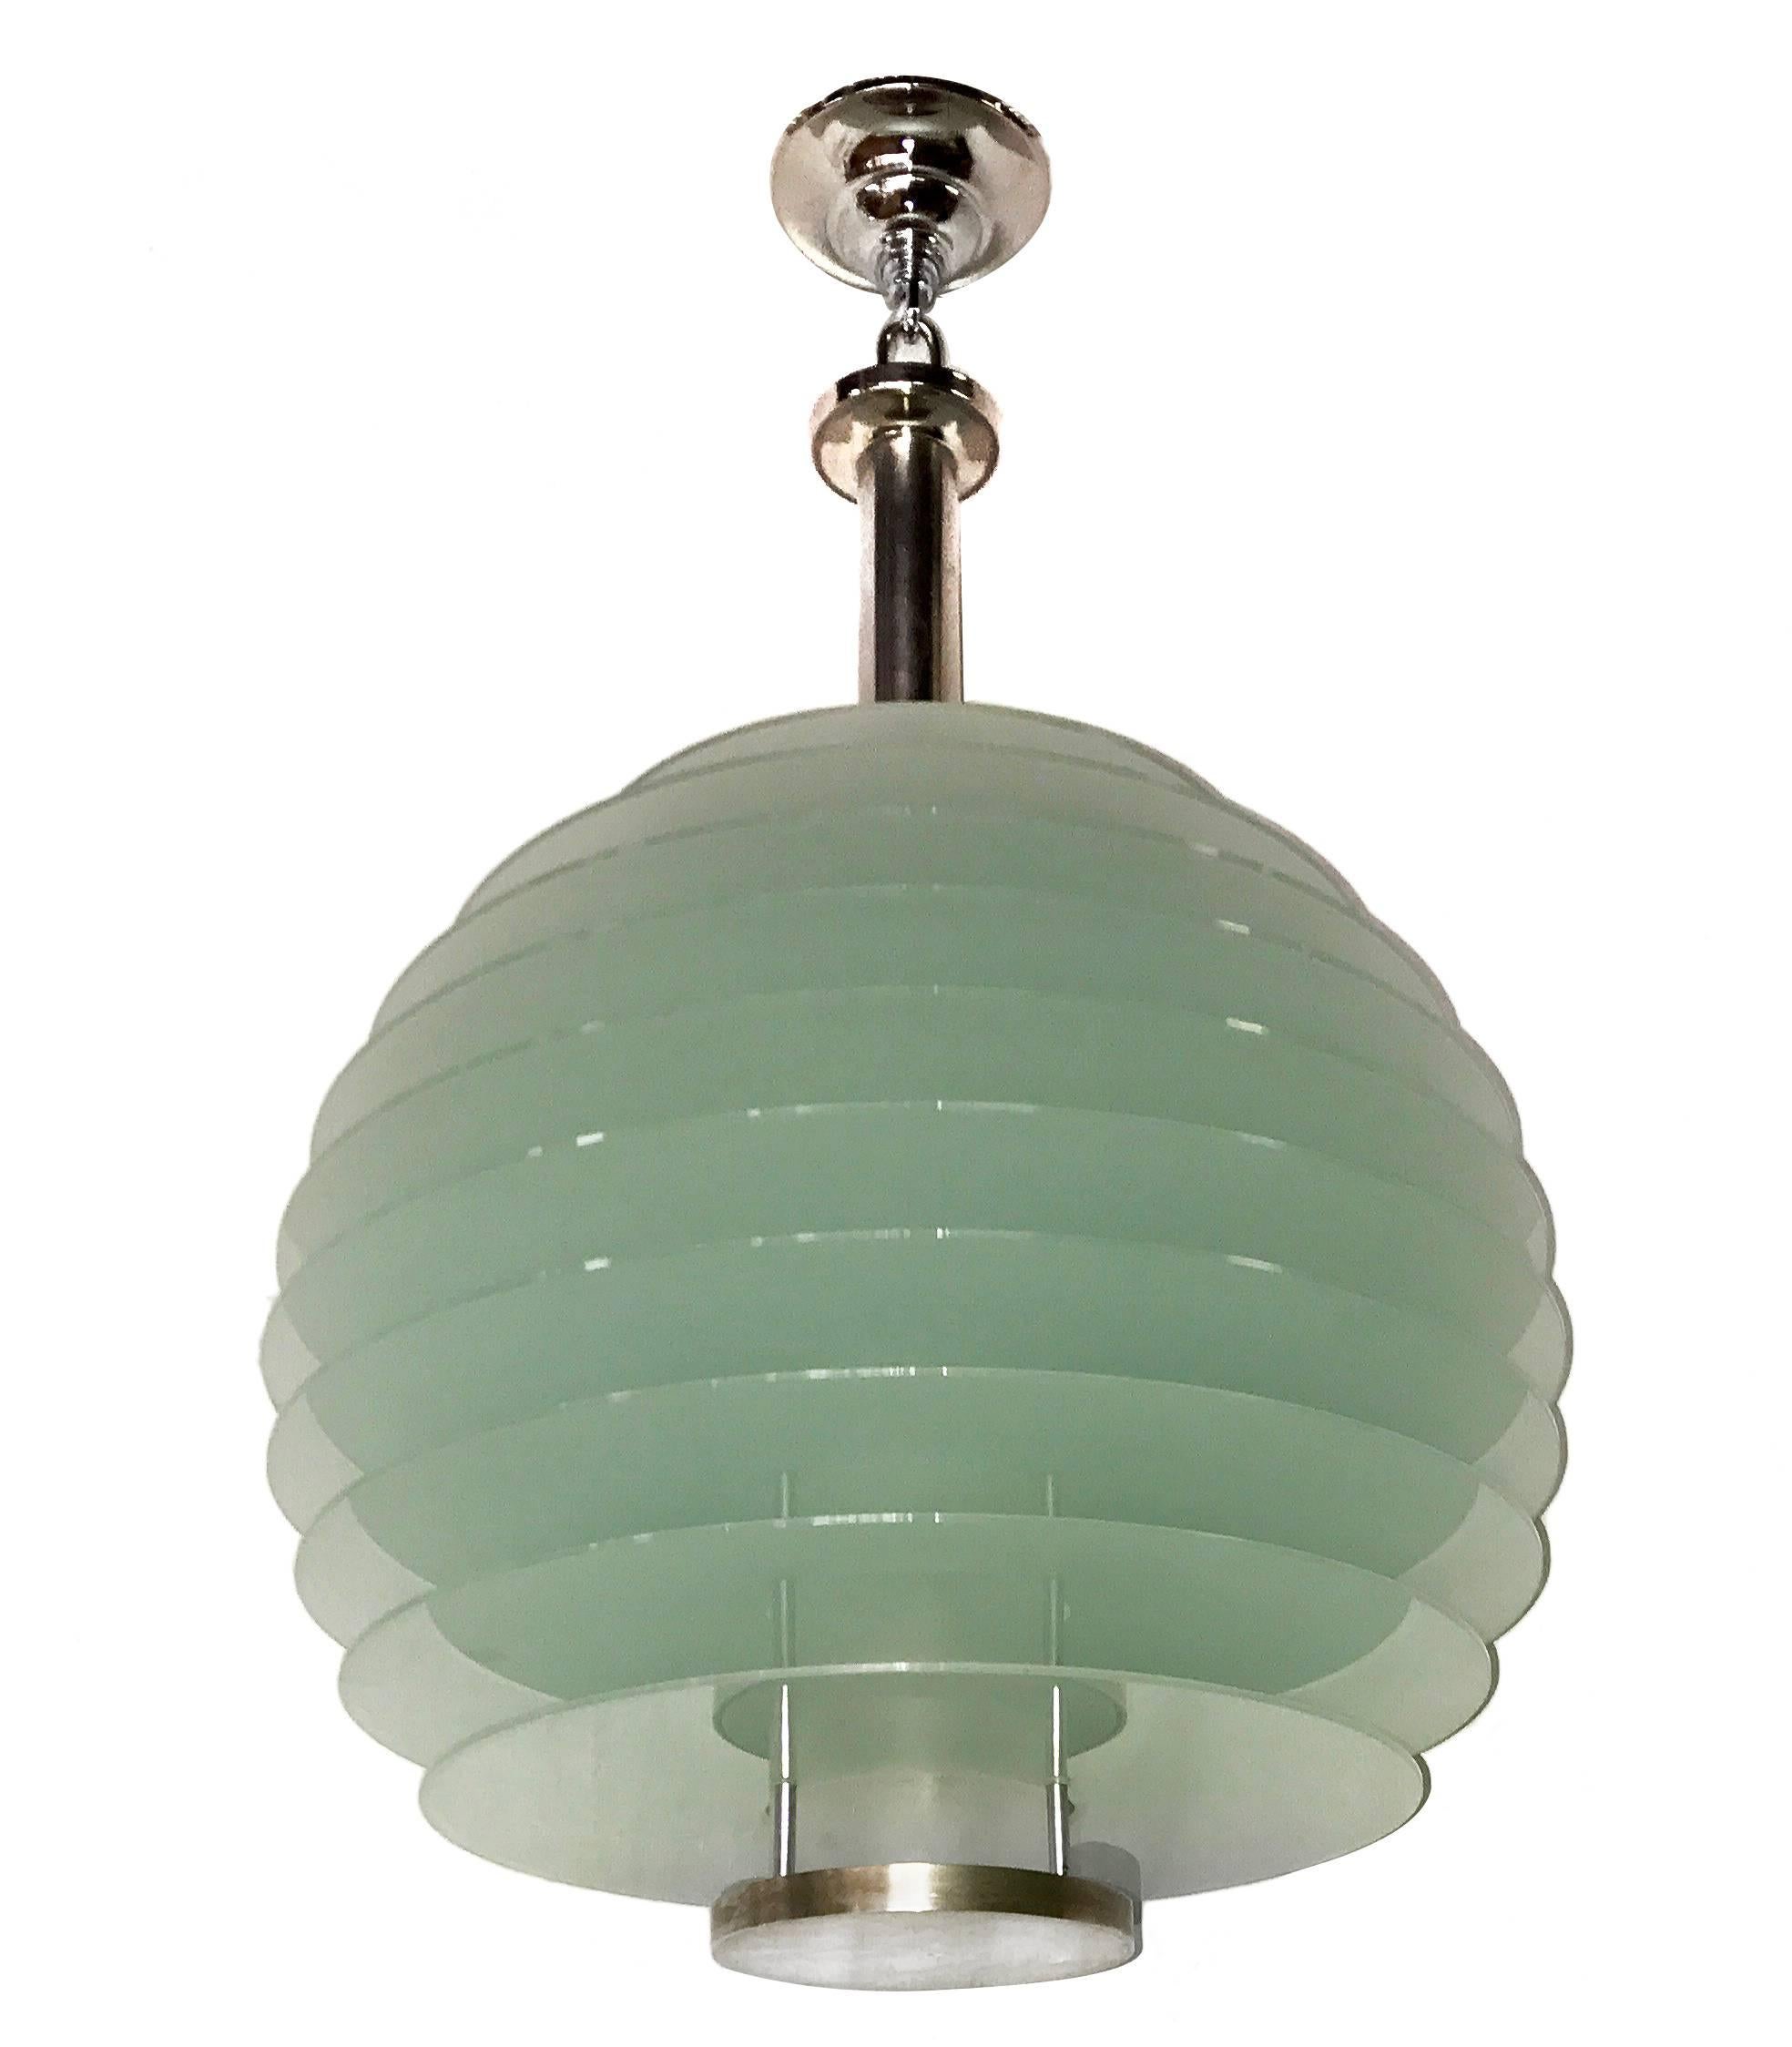 A circa 1960's Italian frosted glass globe shaped light fixture with three interior lights.

Measurements:
Diameter: 24